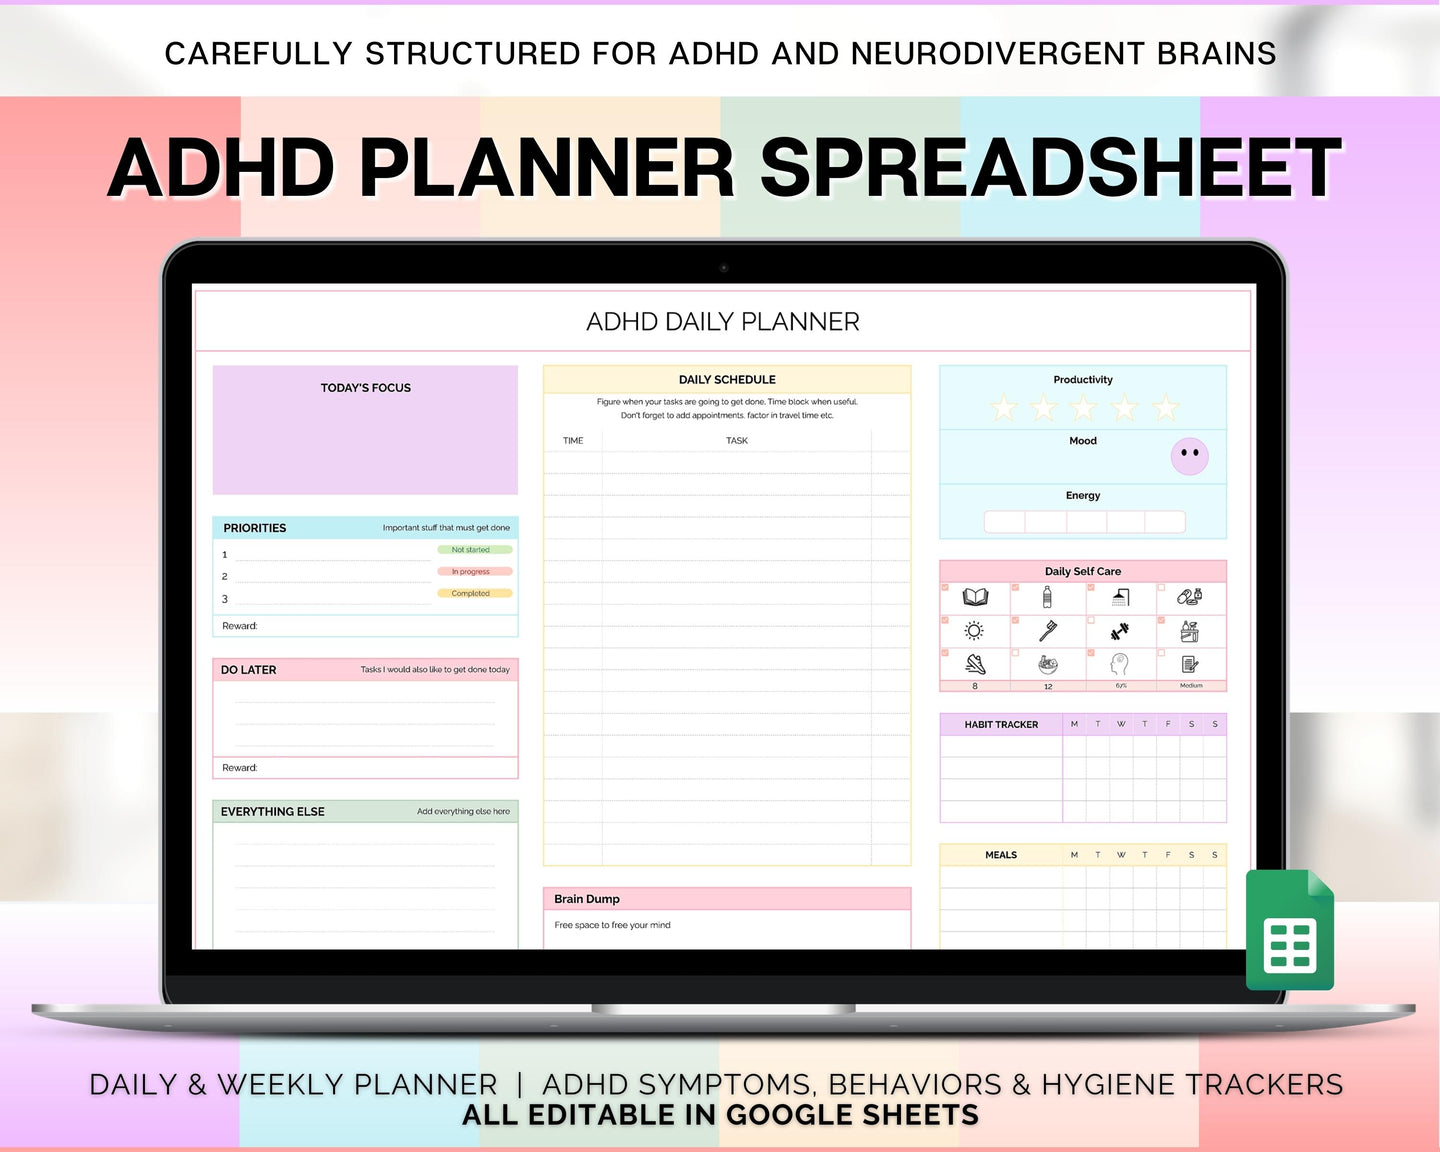 ADHD Planner Spreadsheet for Neurodivergent Adults | Google Sheets Daily & Weekly Planner, Symptom Tracker, Brain Dump & To Do Lists | Rainbow